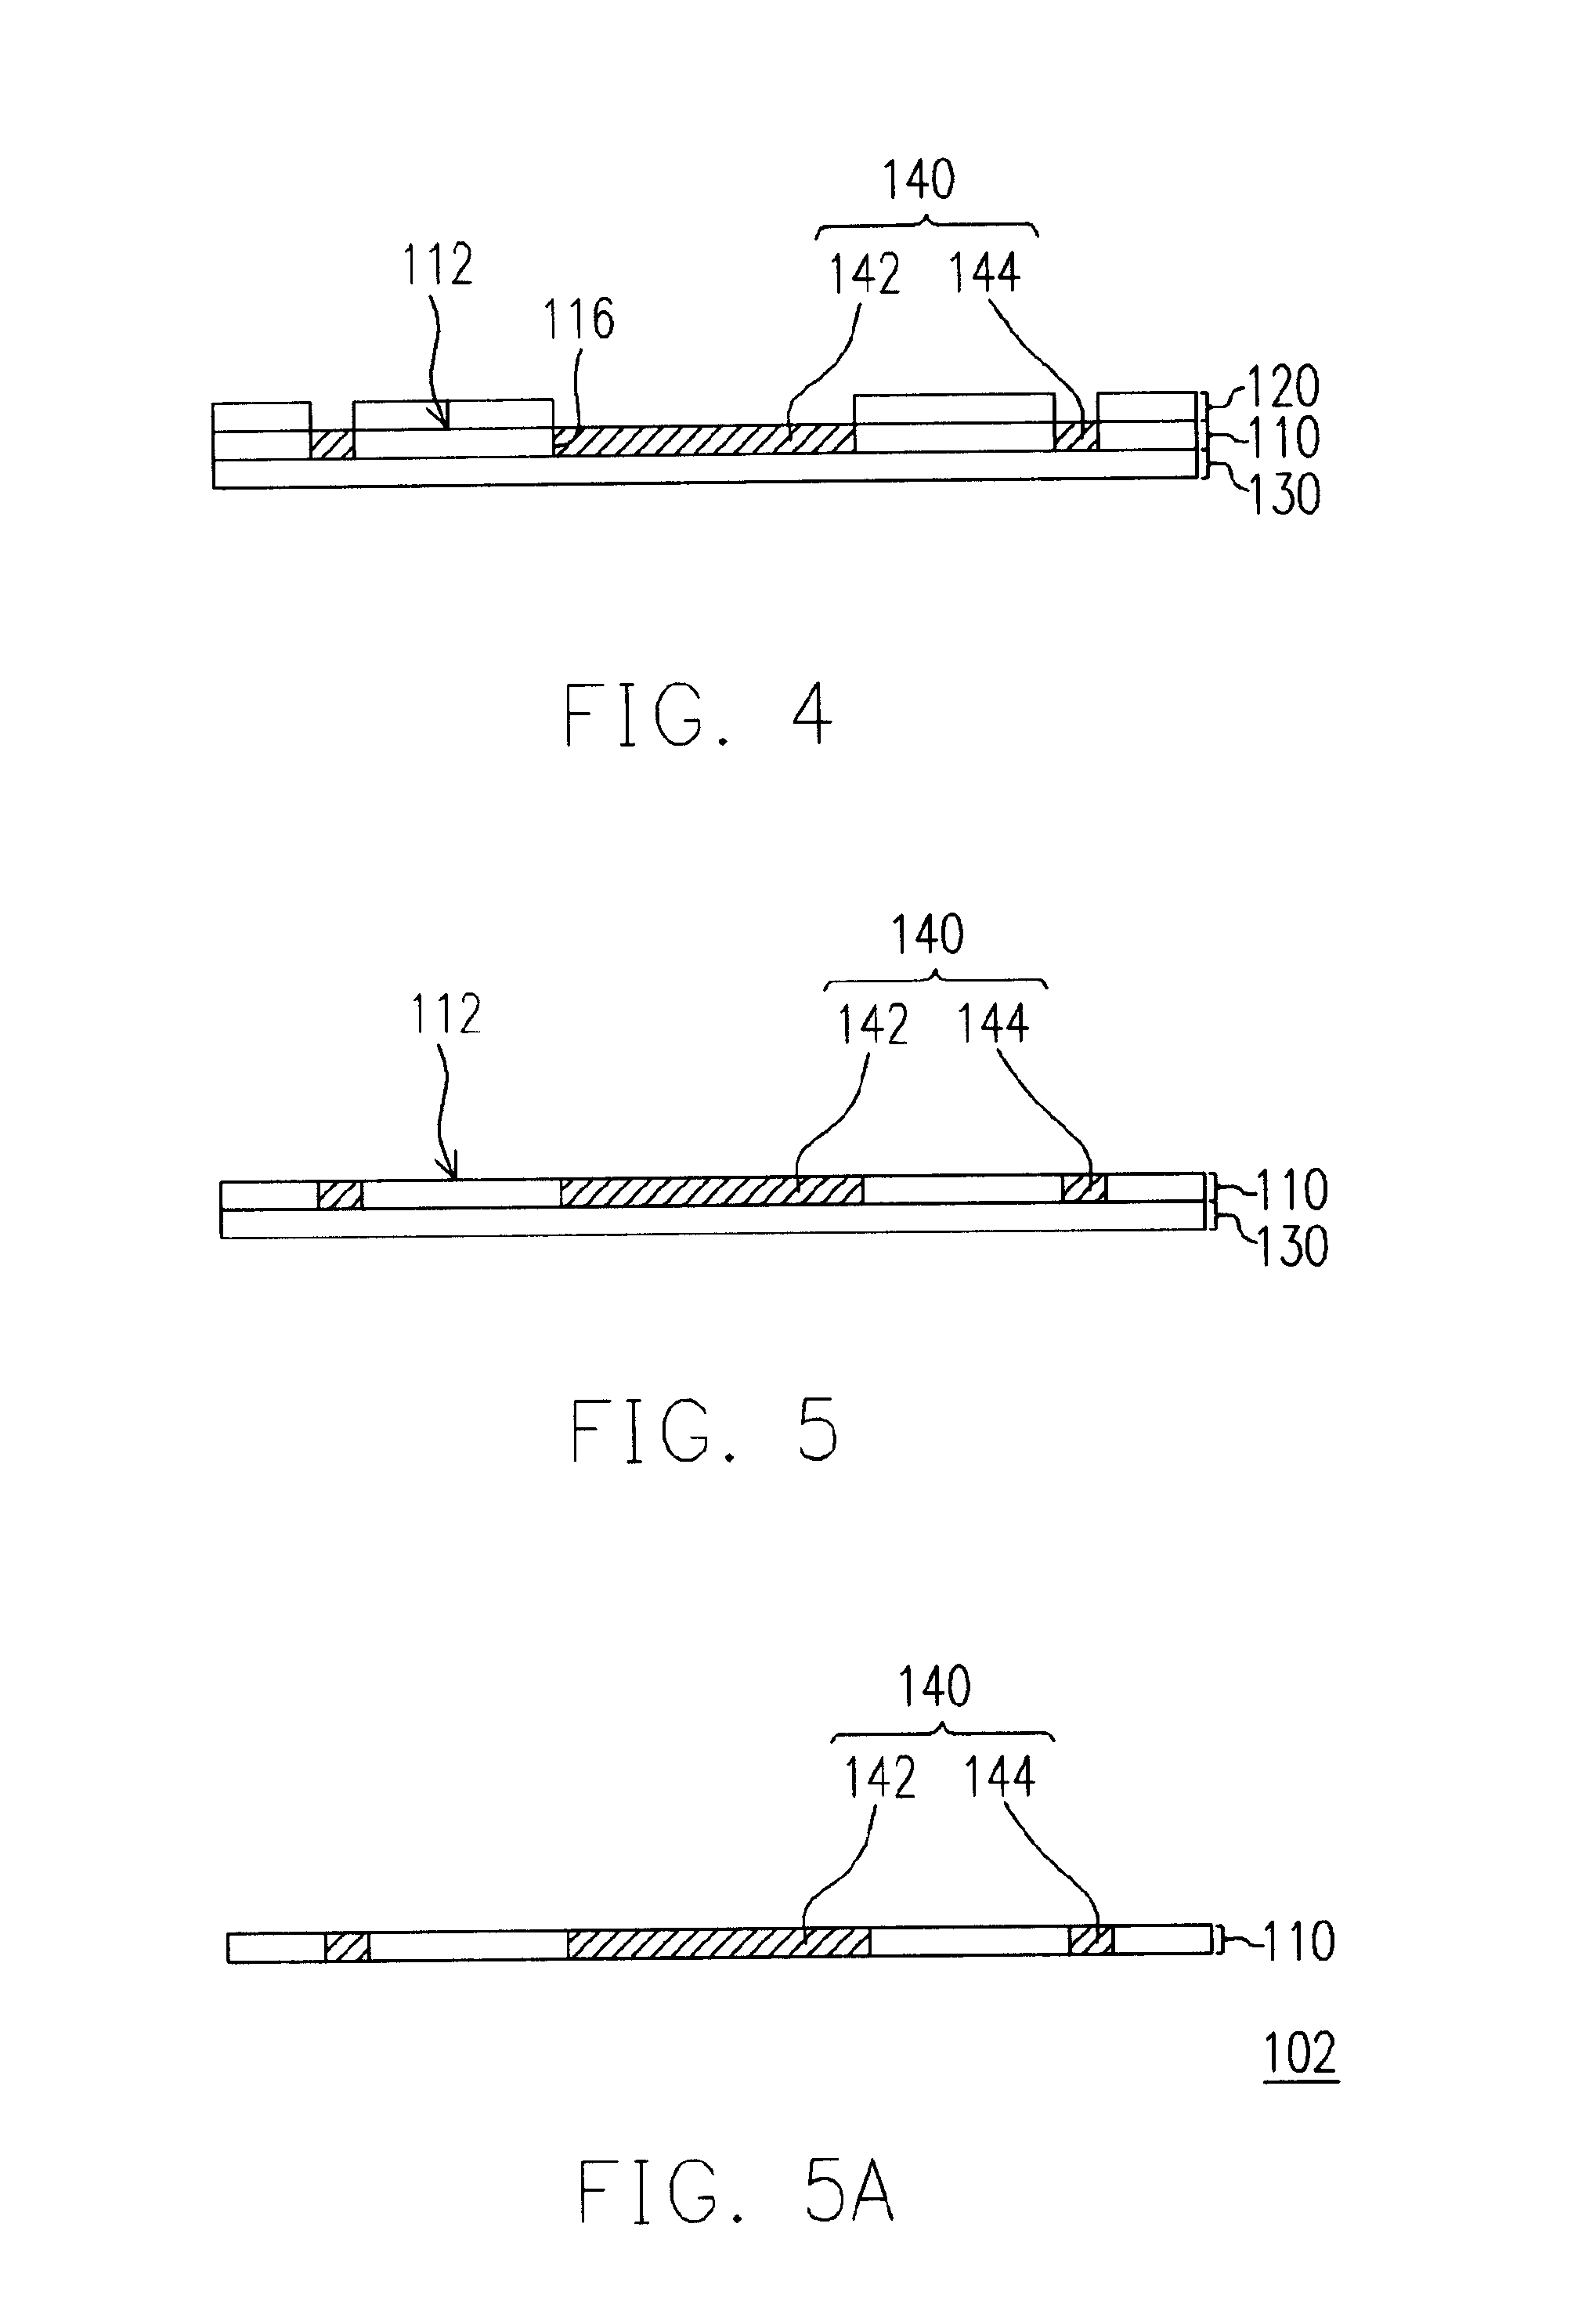 Process and structure for semiconductor package